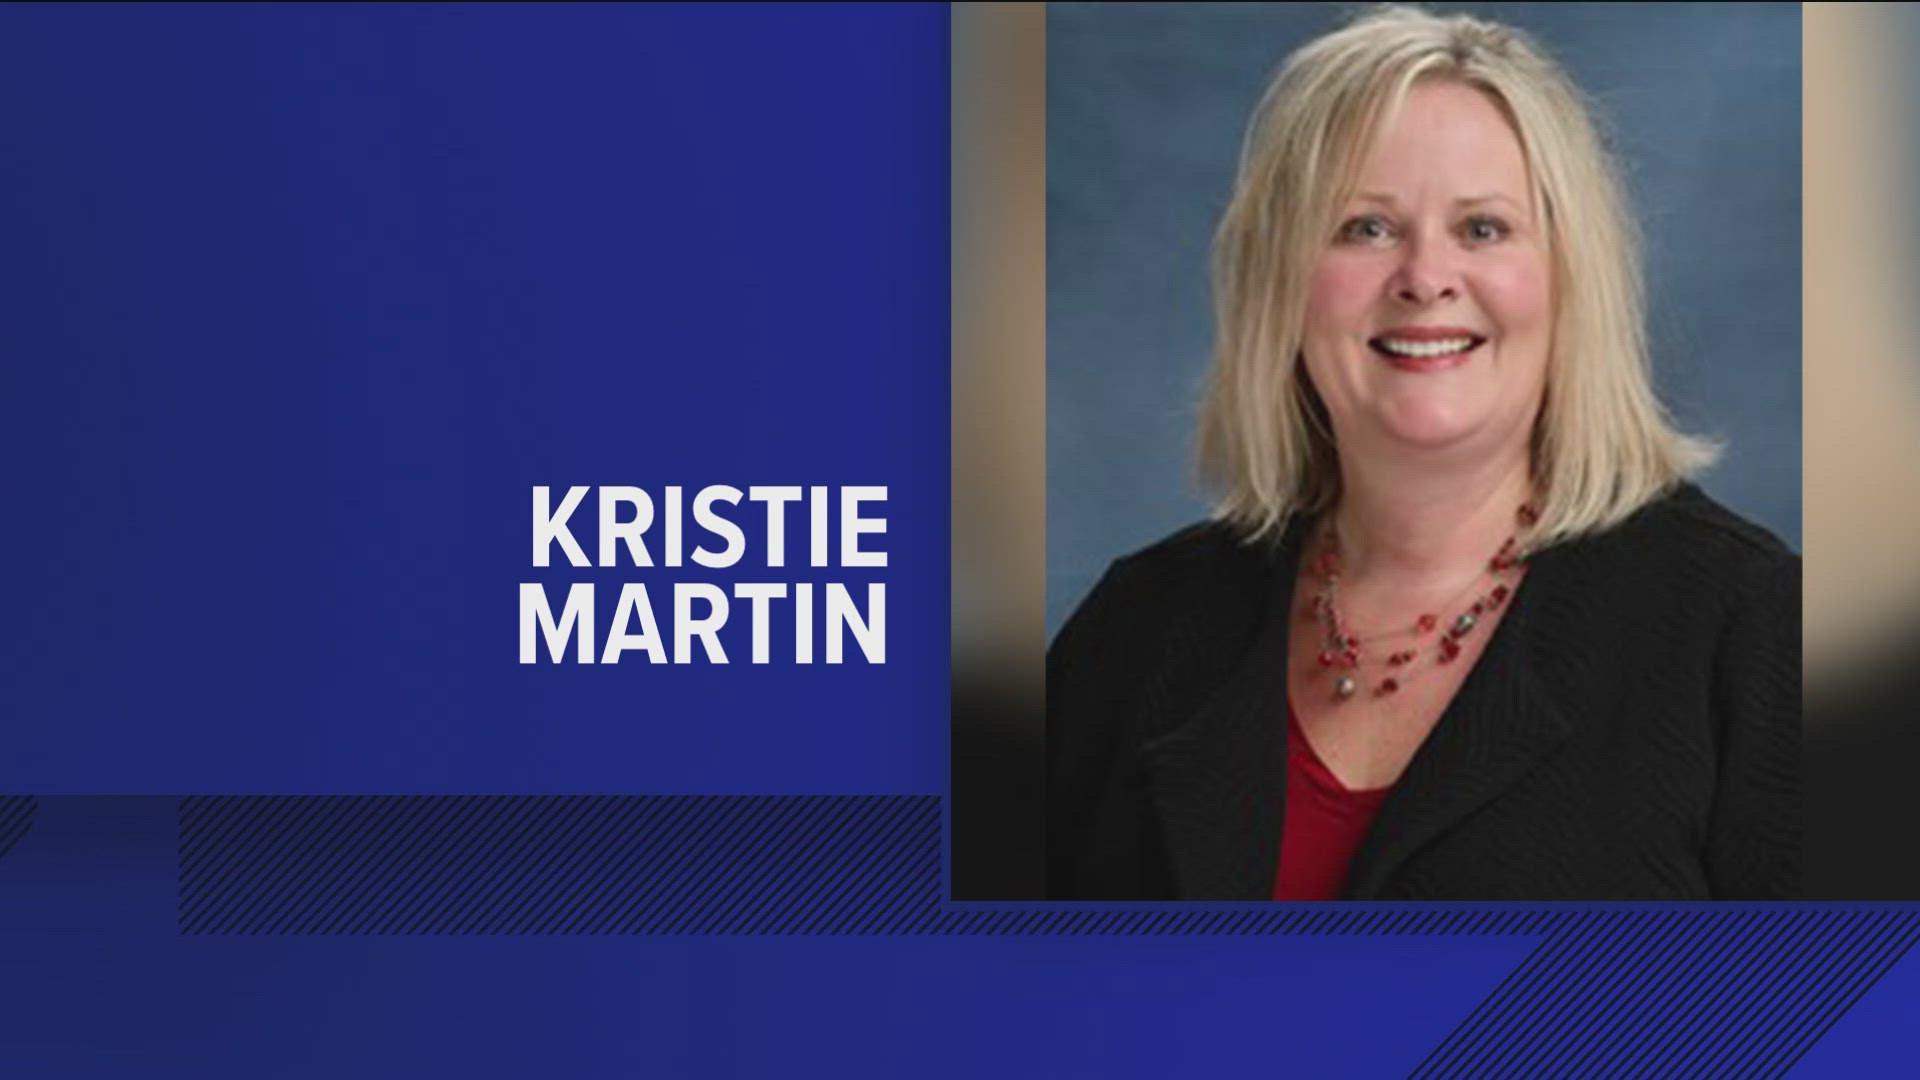 The district's current superintendent, Kadee Anstadt, is slated to retire in July.